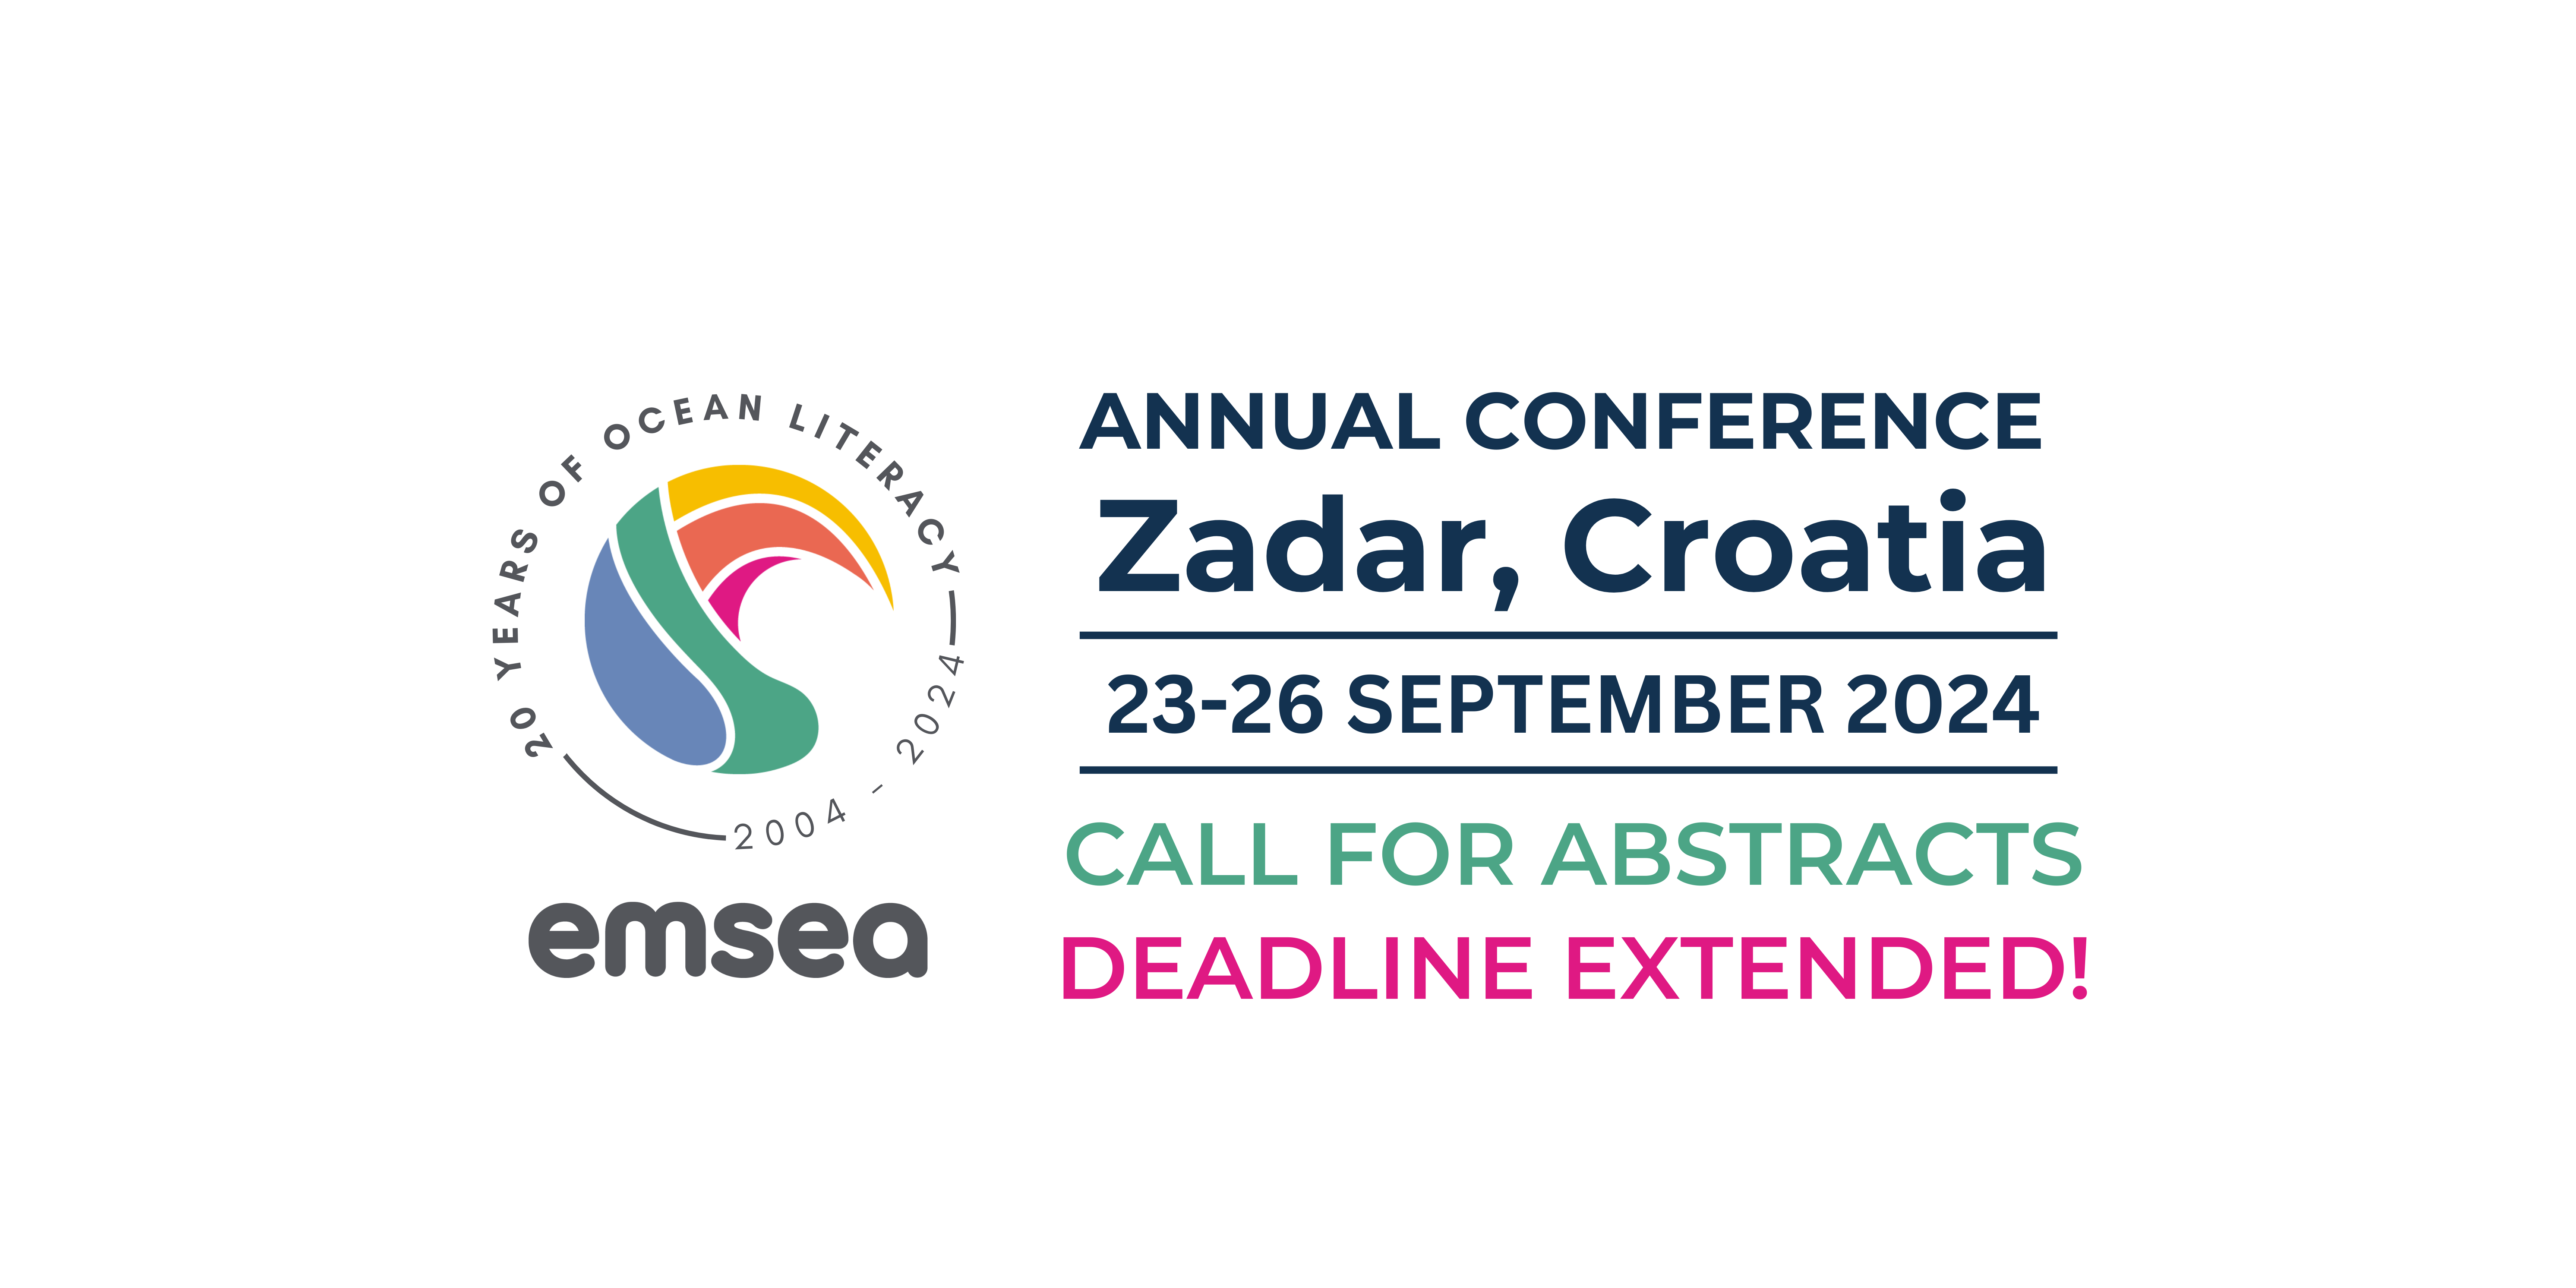 EMSEA logo, conference location (Zadar, Croatia), dates (23-26 September) and information about deadline extension